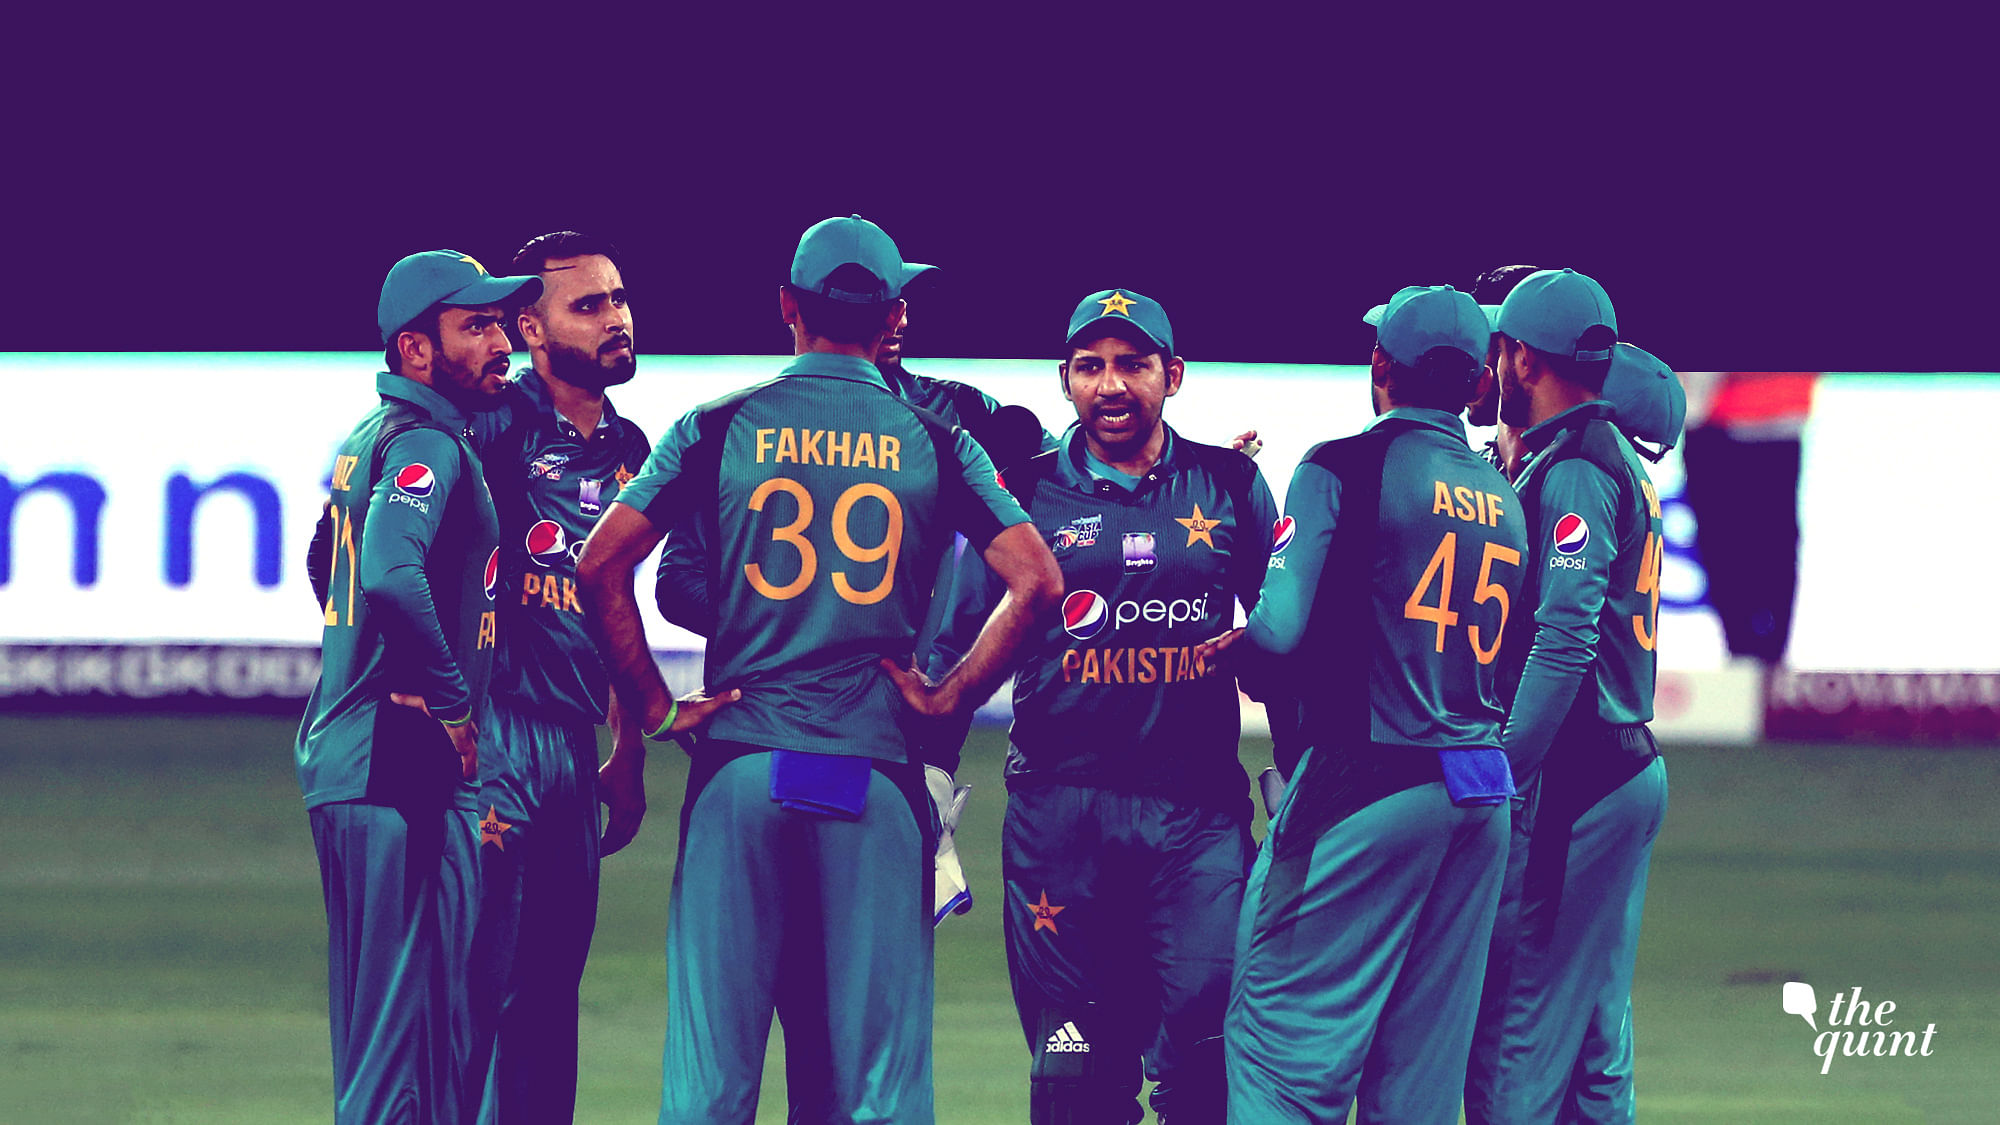 The Pakistan cricket team is playing India on Sunday in the Asia Cup.